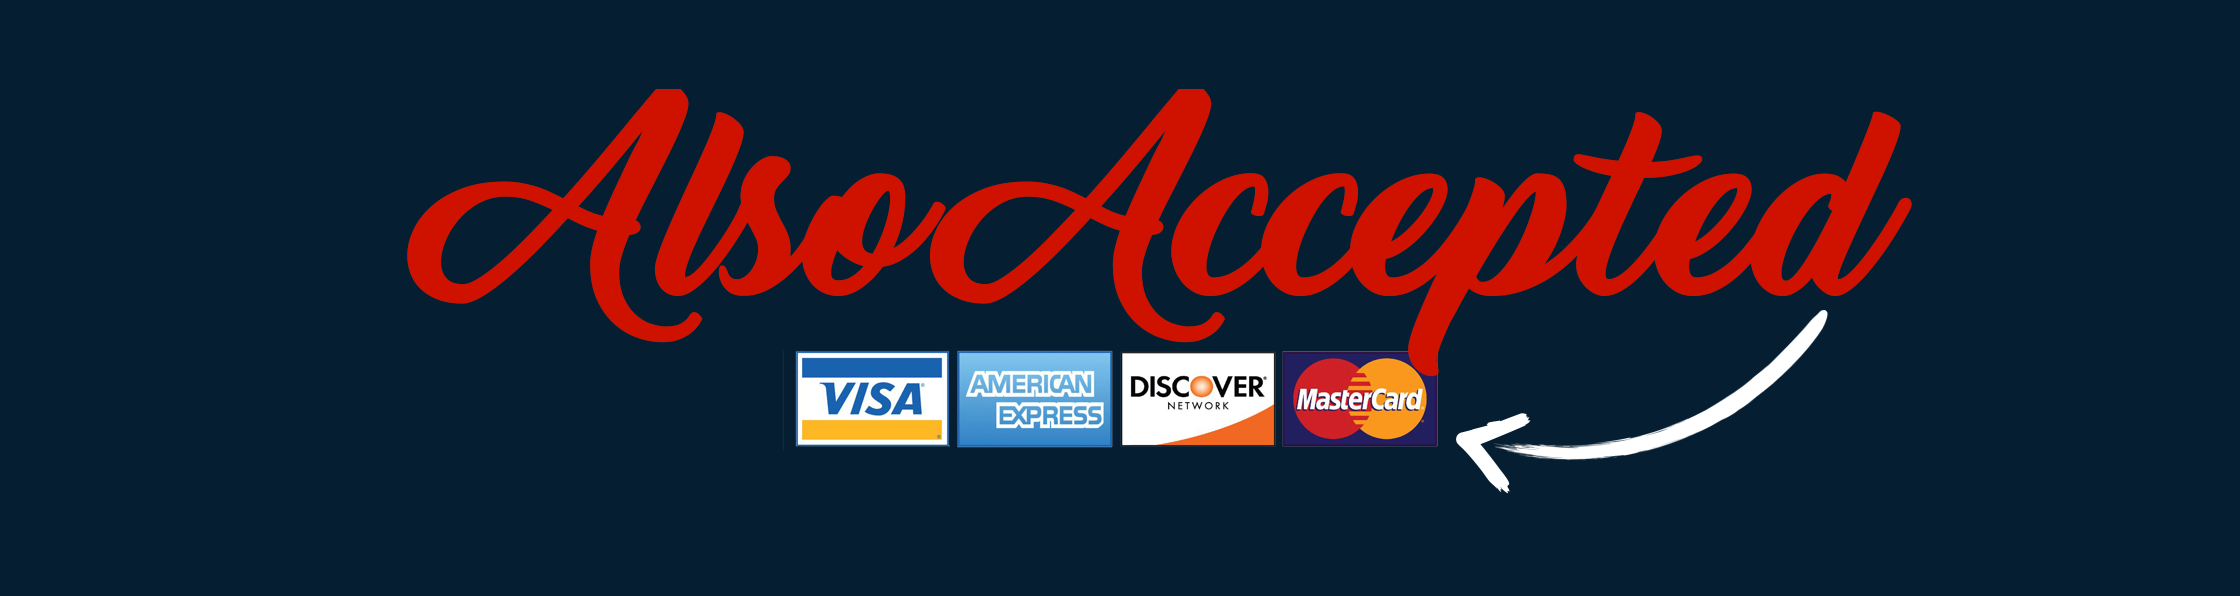 Also Accepted - Visa, Amex, Discover, MasterCard